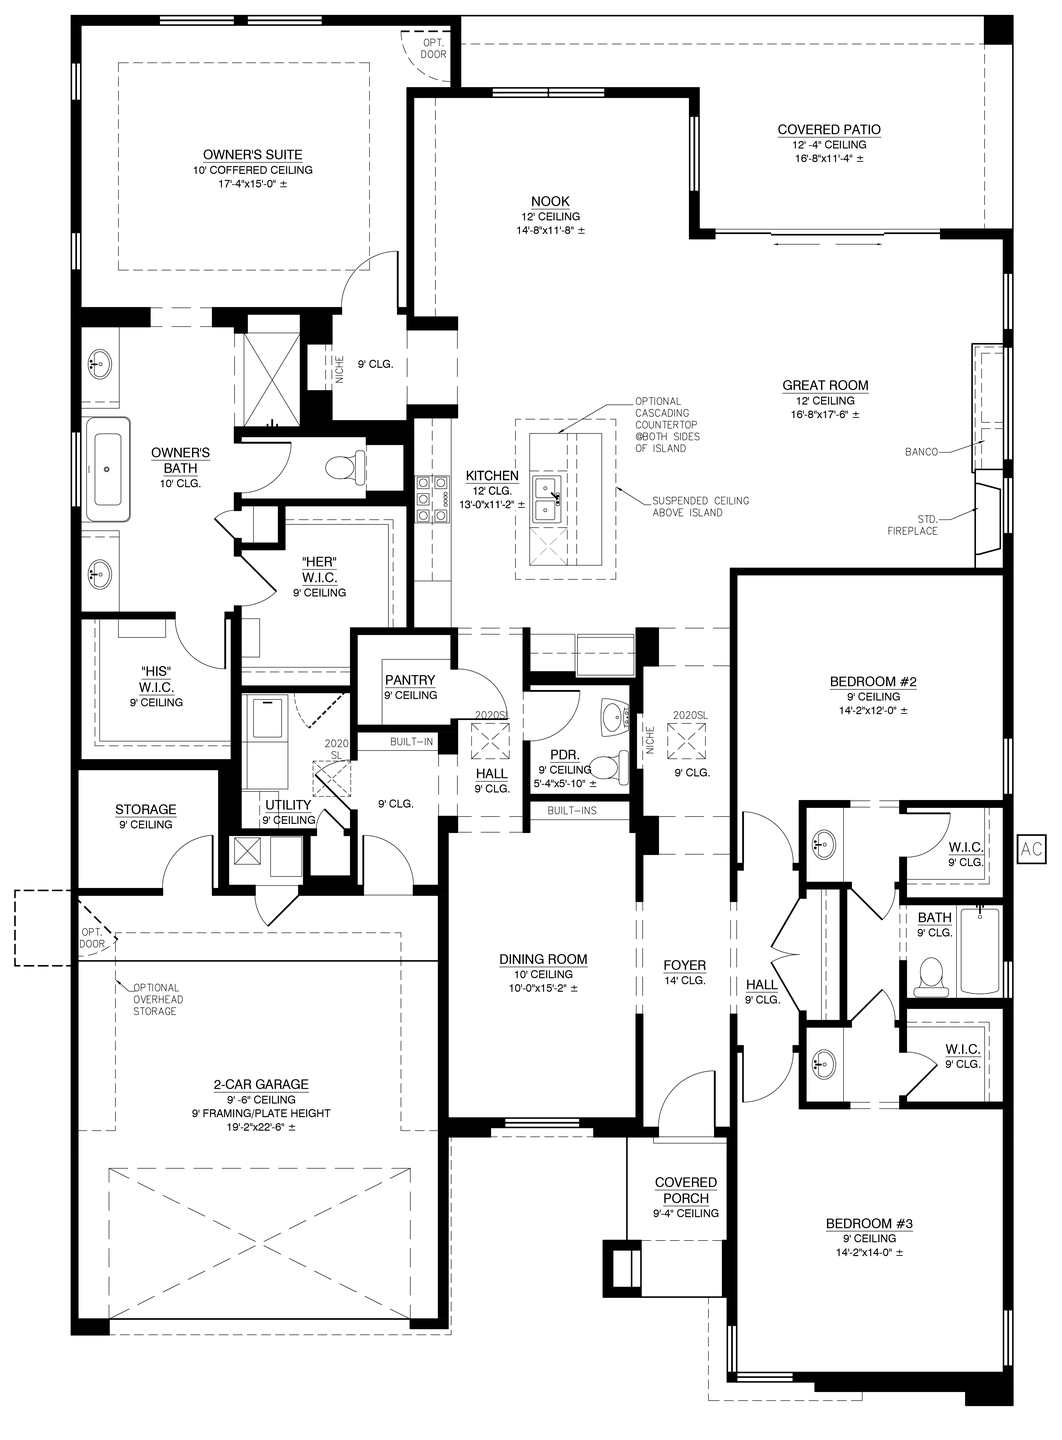 2,626sf New Home